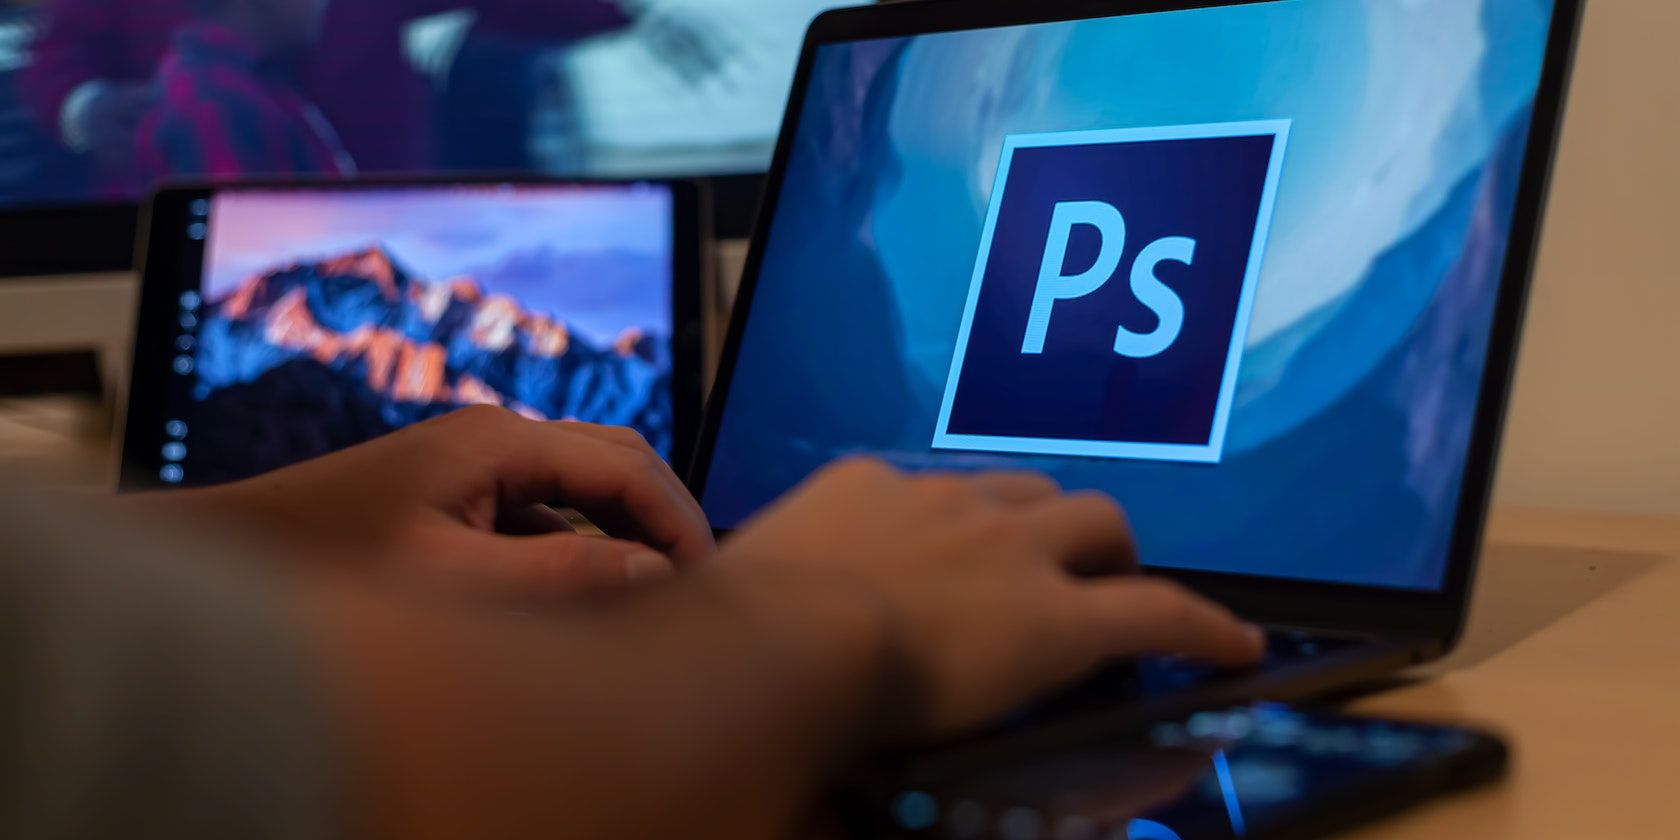 A Person Using Adobe Photoshop On A Windows Laptop